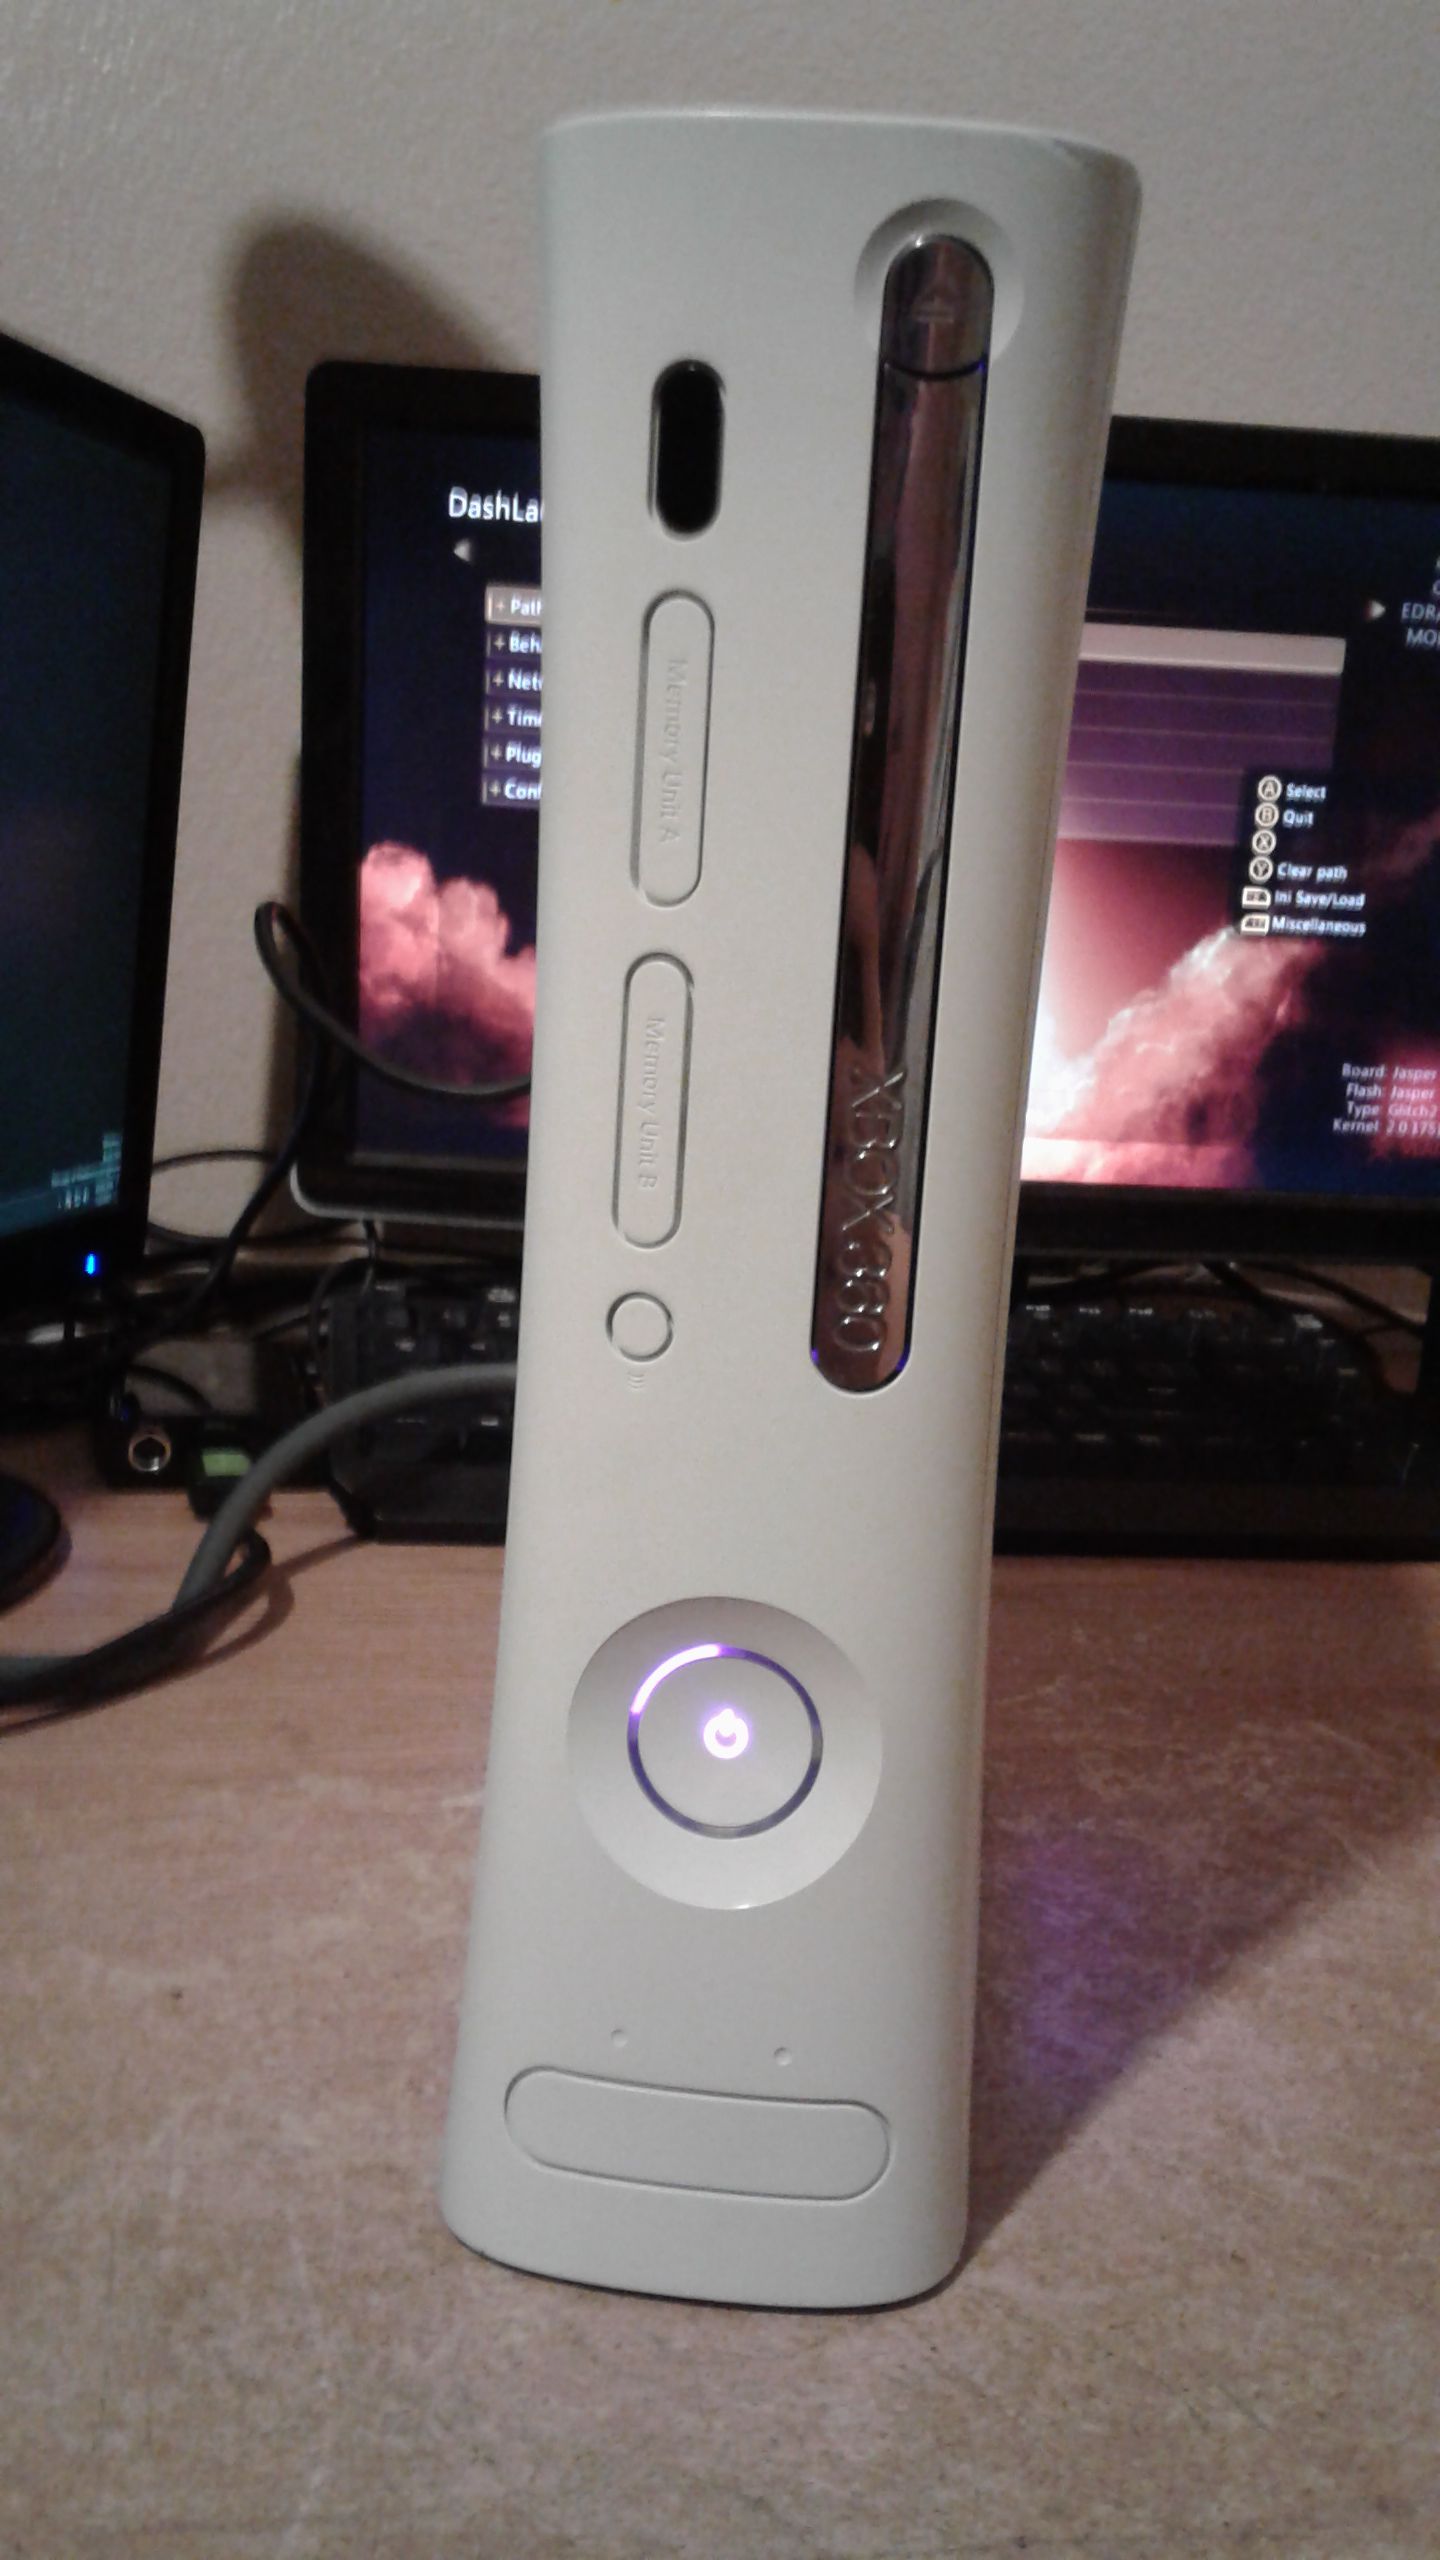 Rgh Xbox 360 for Sale in San Marcos, CA - OfferUp